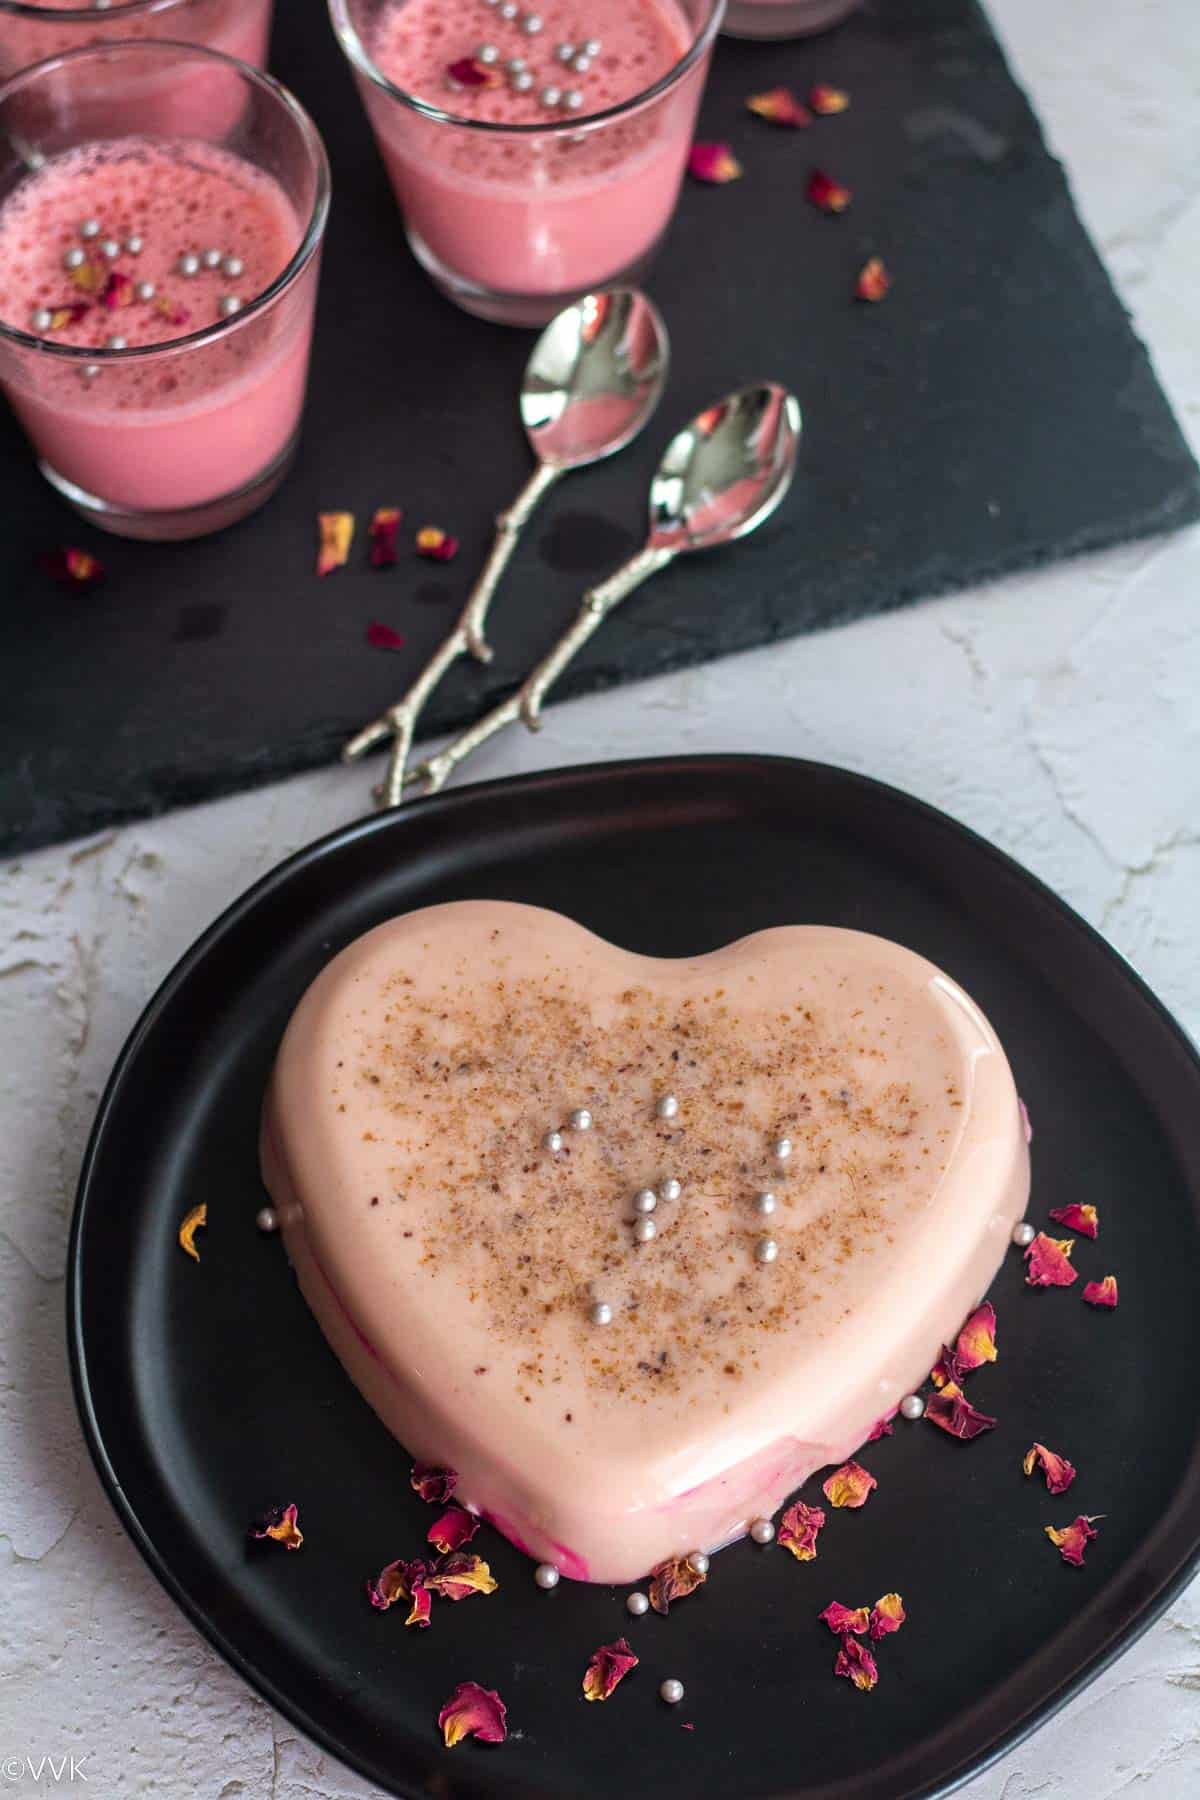 heart shaped panna cotta placed on black plate with rose petals drizzled